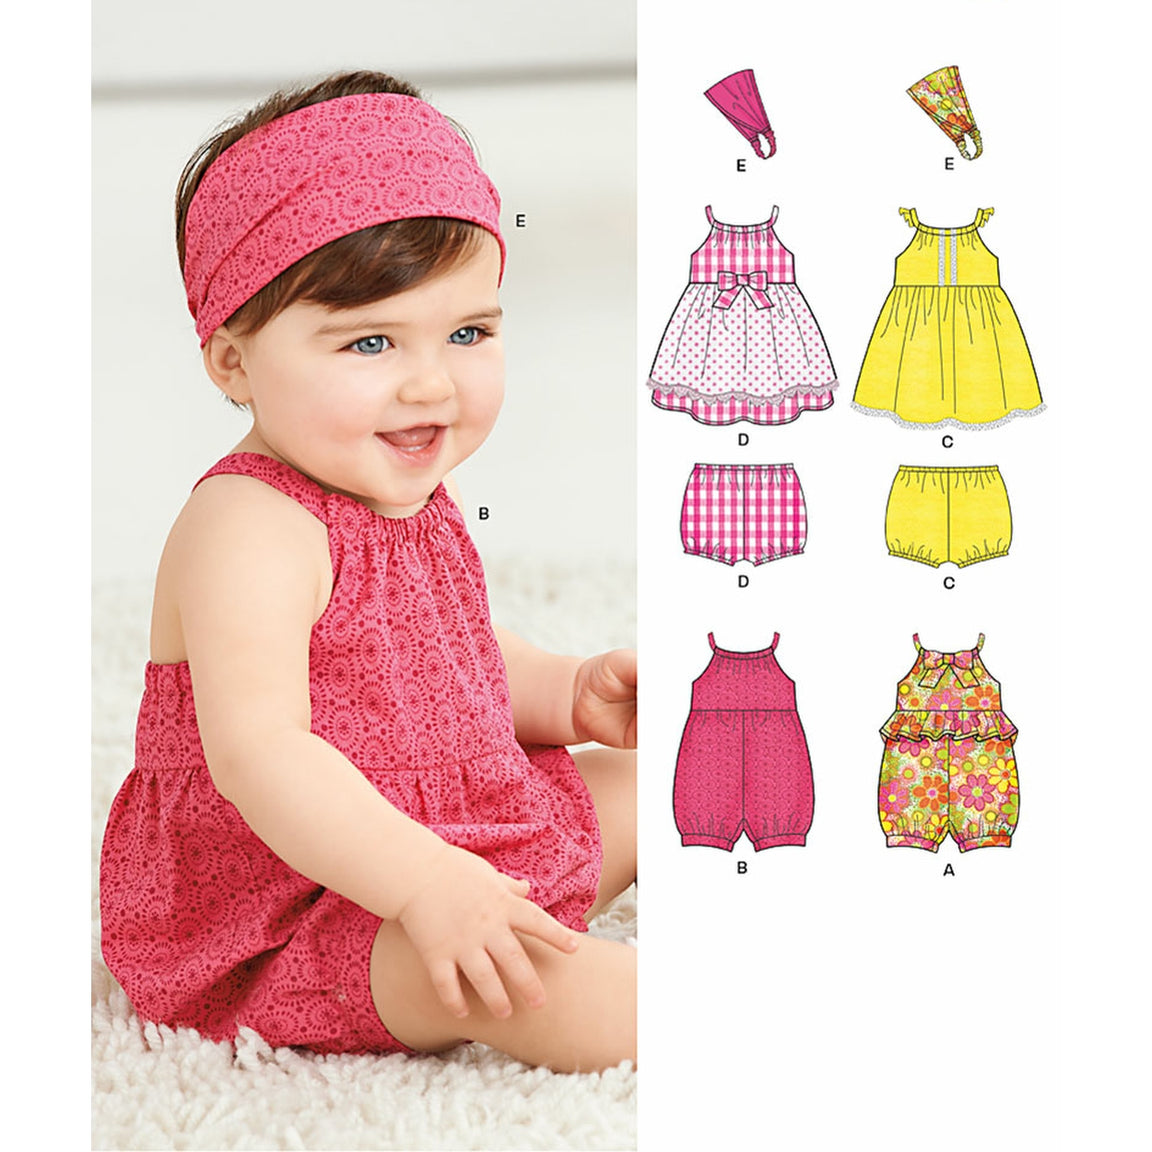 Sewing Patterns | Children | Toddlers — Page 7 — jaycotts.co.uk ...